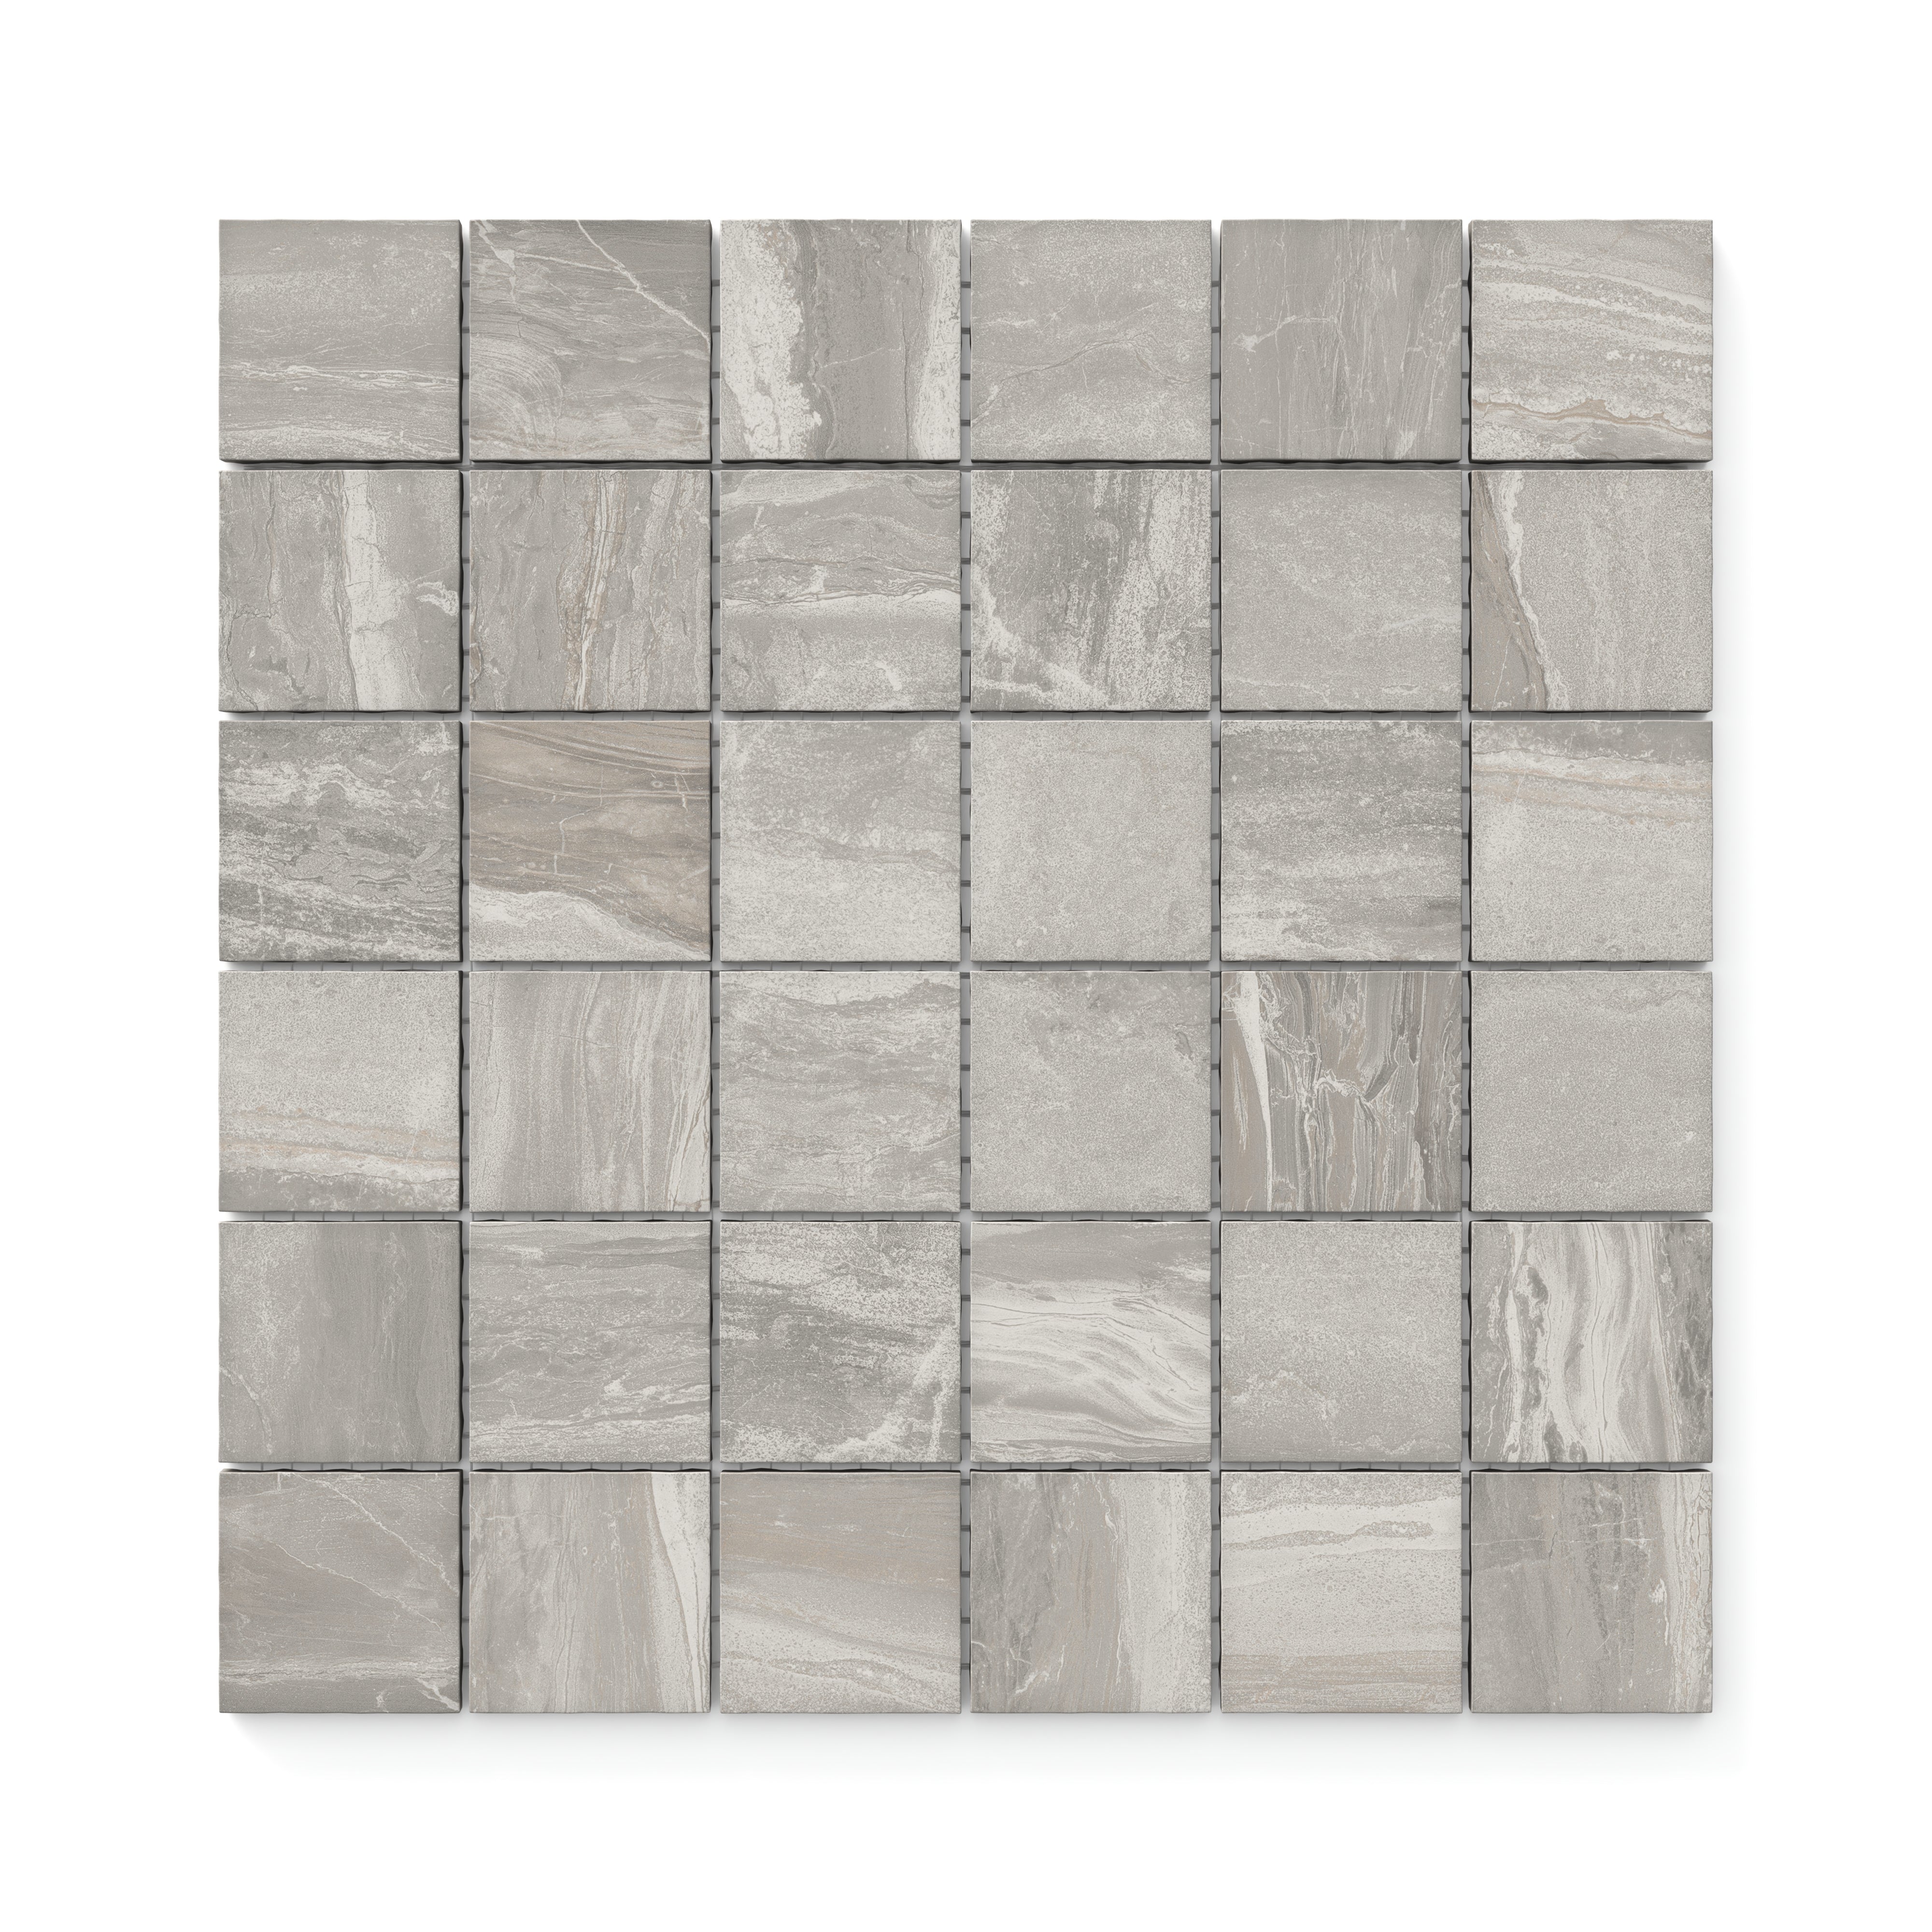 Harley 2x2 Matte Porcelain Mosaic Tile in Taupe